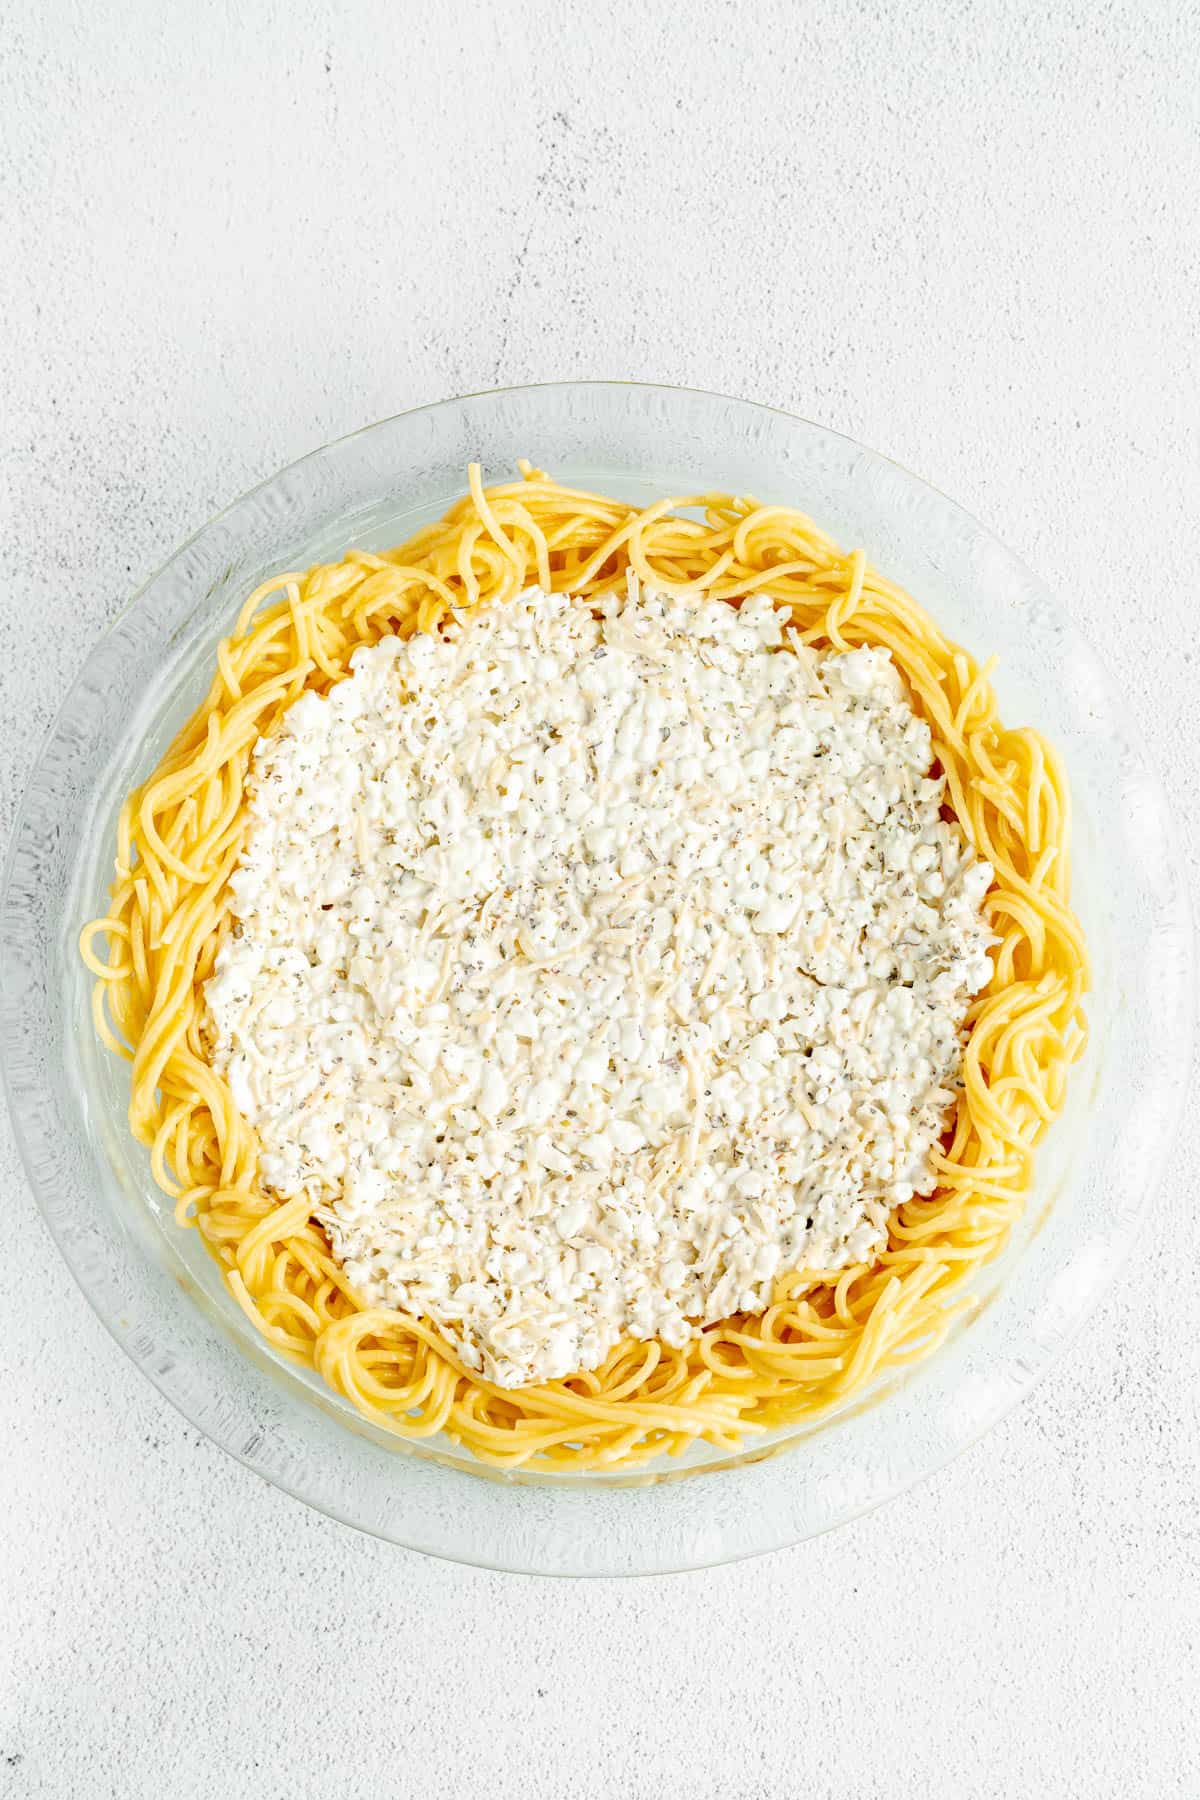 Adding cottage cheese mixture to cooked spaghetti noodles in a glass pie dish.